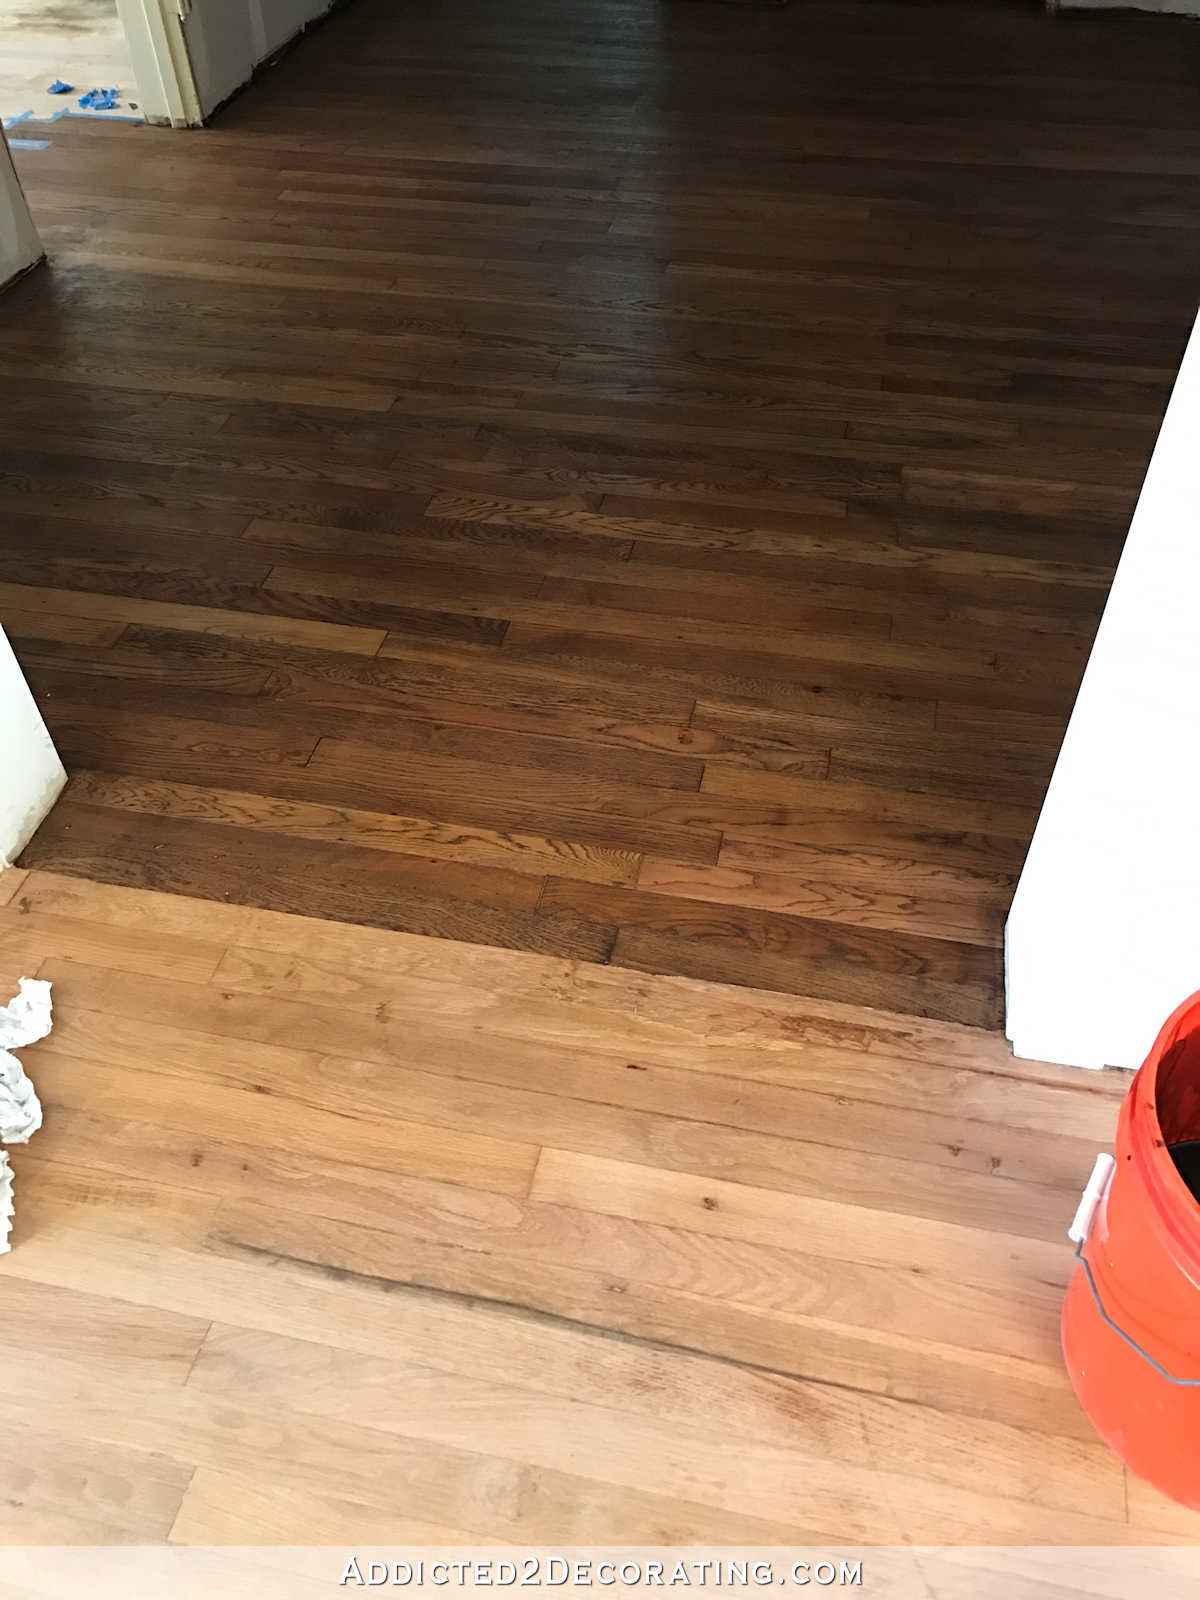 28 Recommended Hardwood Floor Care after Refinishing 2024 free download hardwood floor care after refinishing of adventures in staining my red oak hardwood floors products process pertaining to staining red oak hardwood floors 2 tape off one section at a time fo